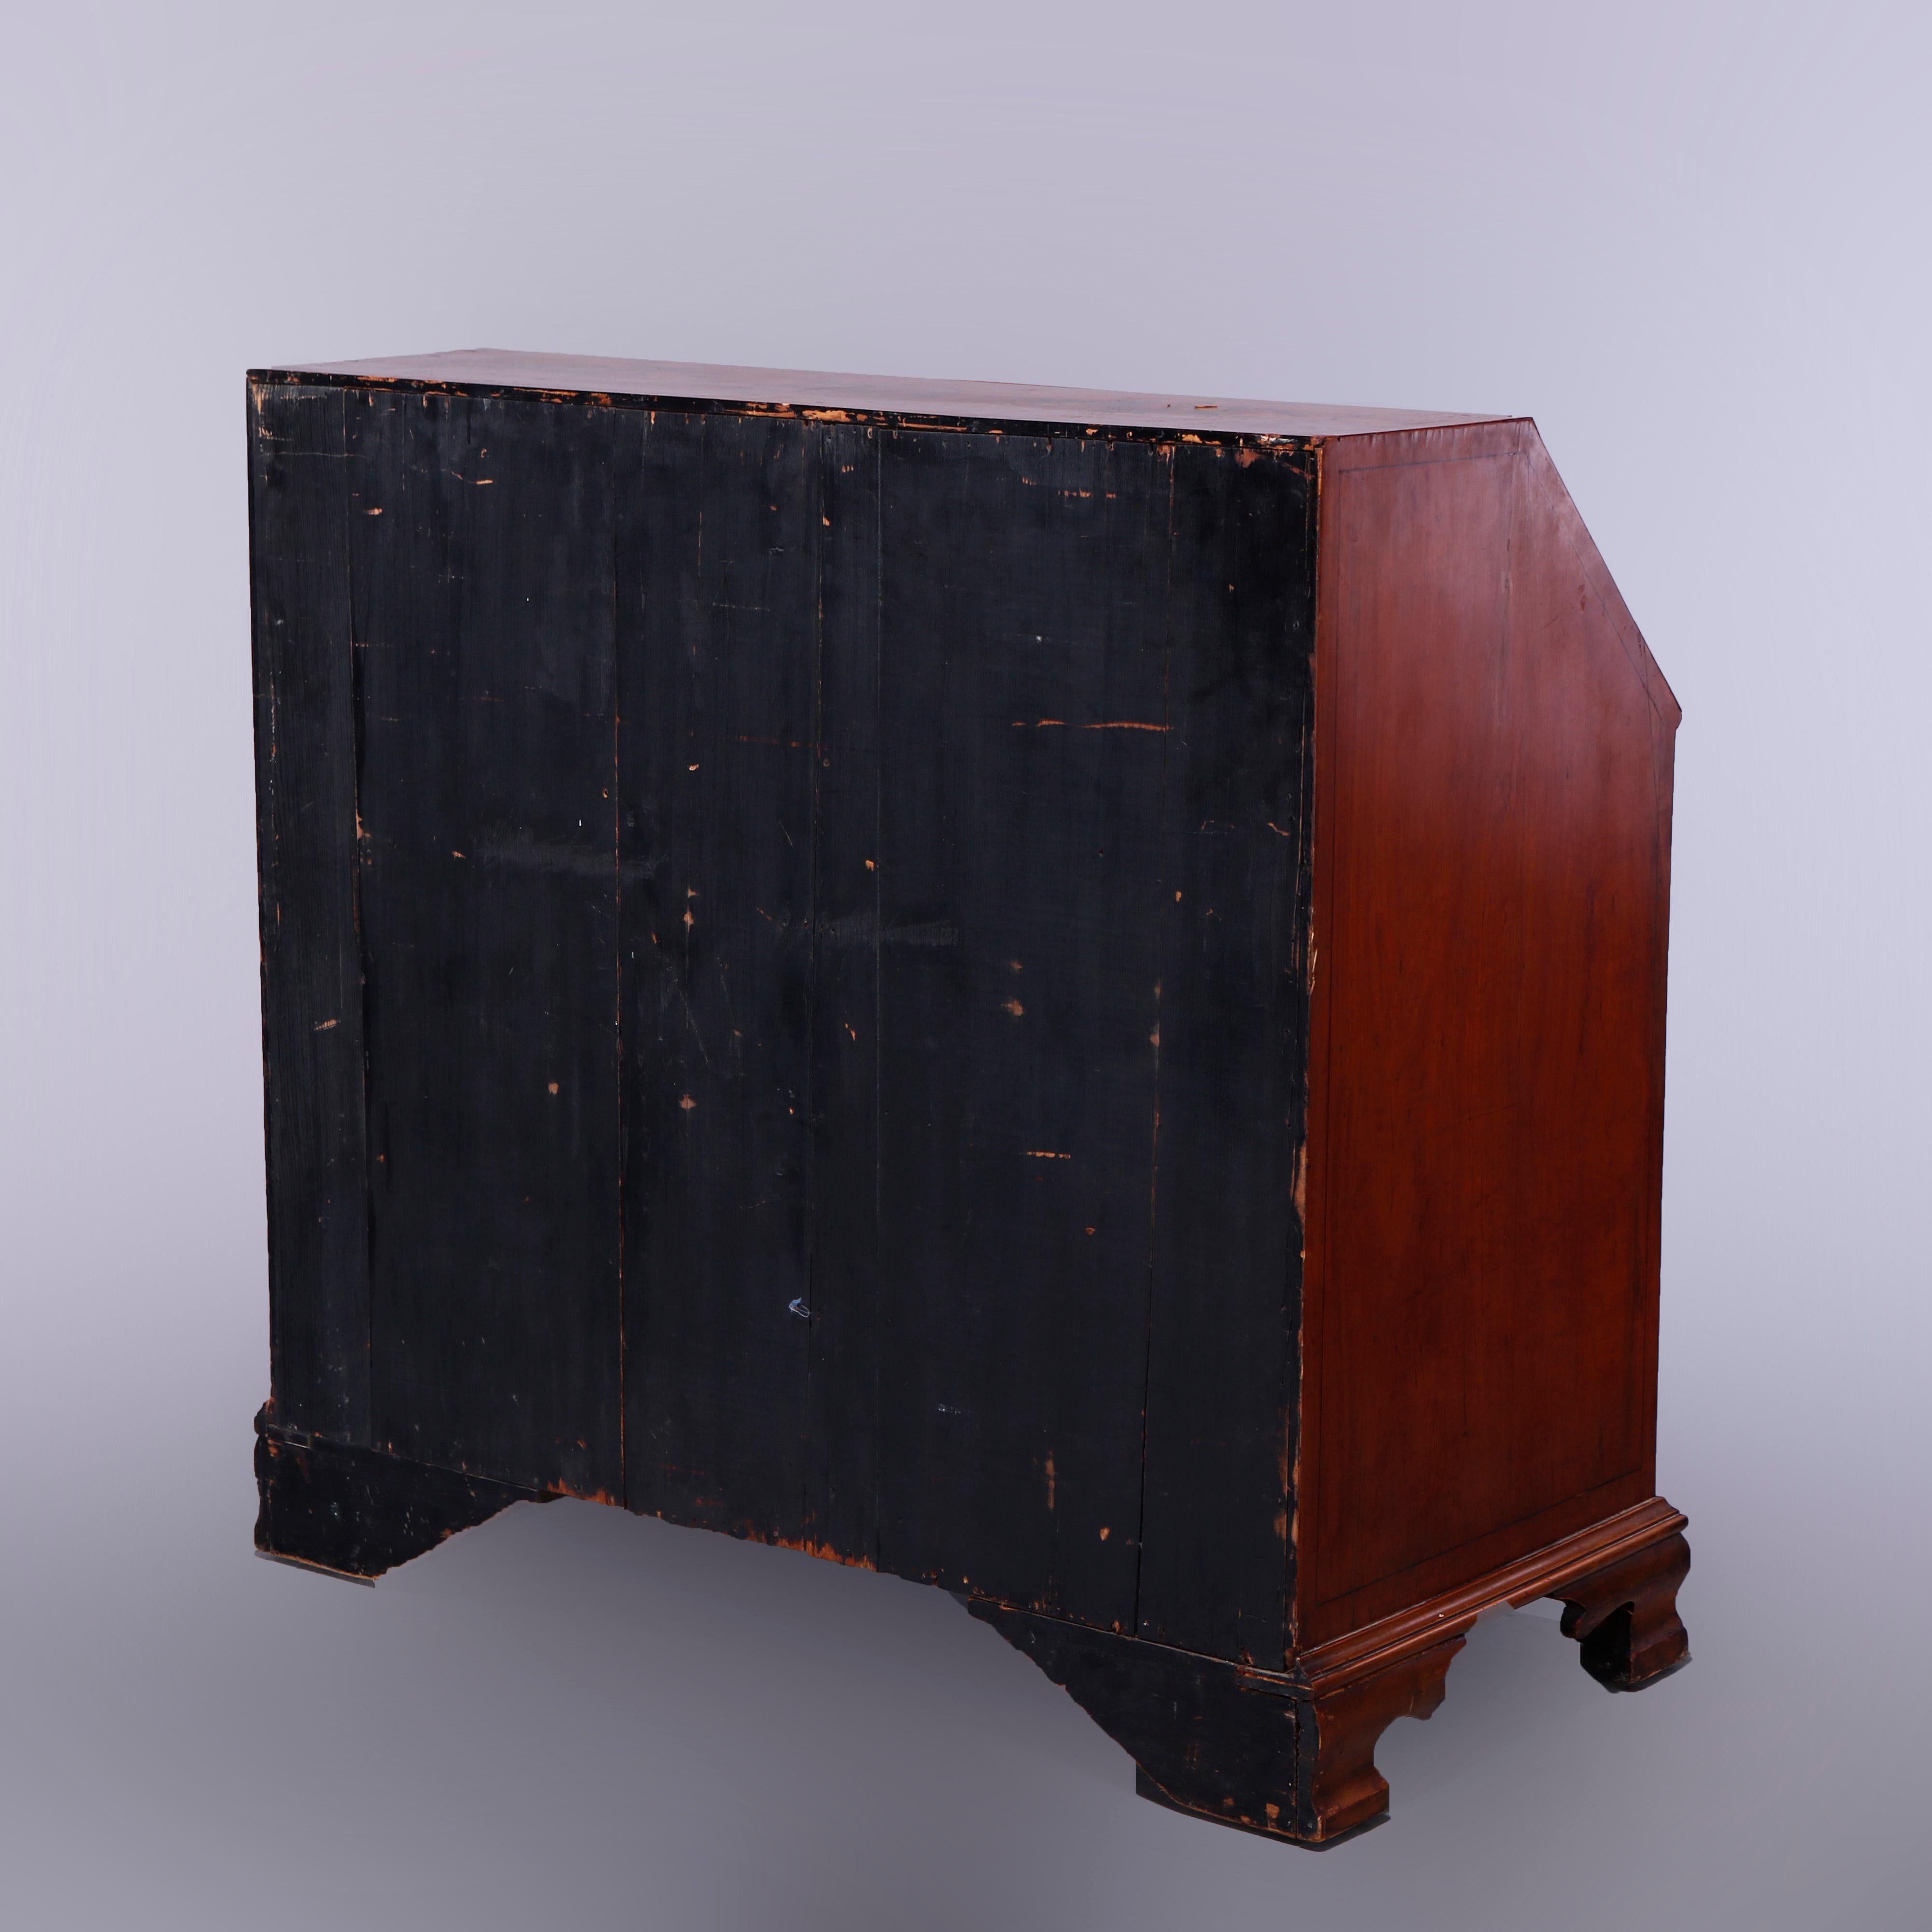 Antique English Adams Decorated Satinwood Drop-Front Desk, 18th-19th C For Sale 11